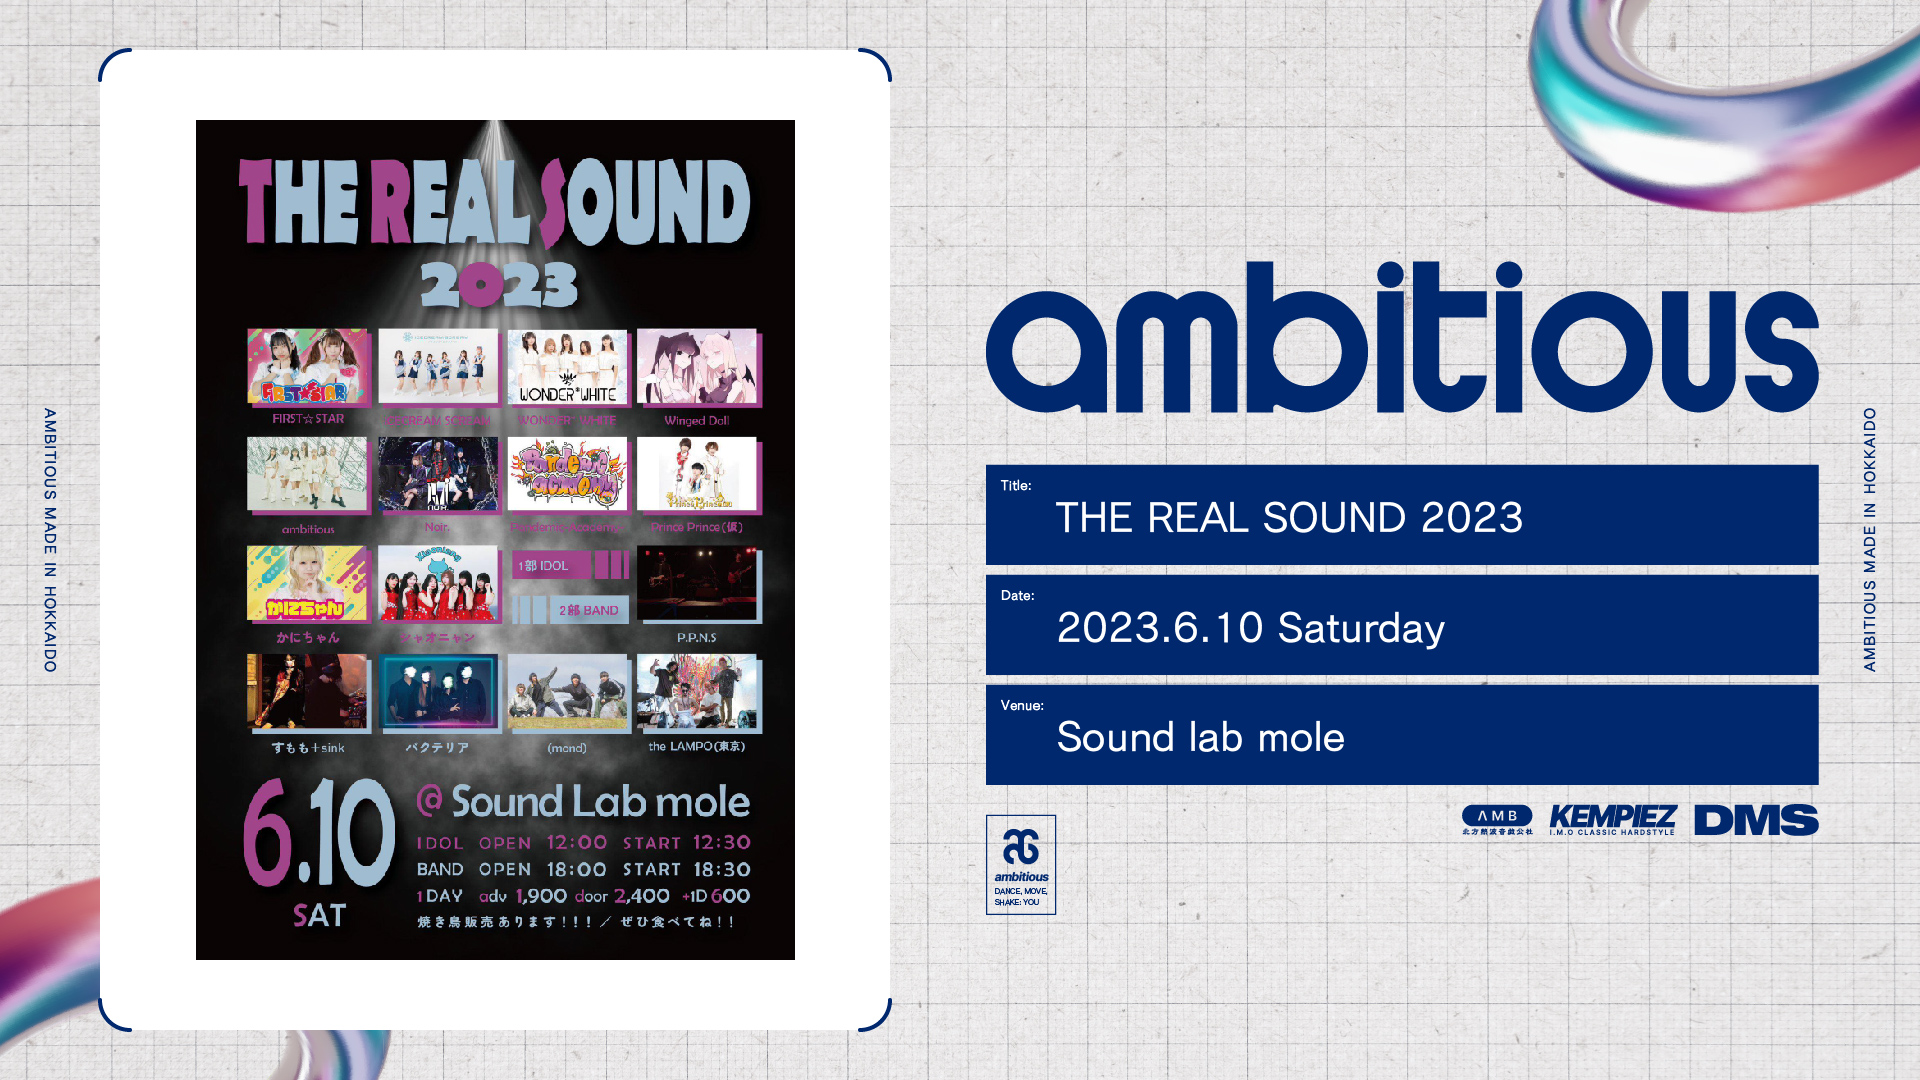 6/10、｢THE REAL SOUND 2023」にambitiousが出演します！